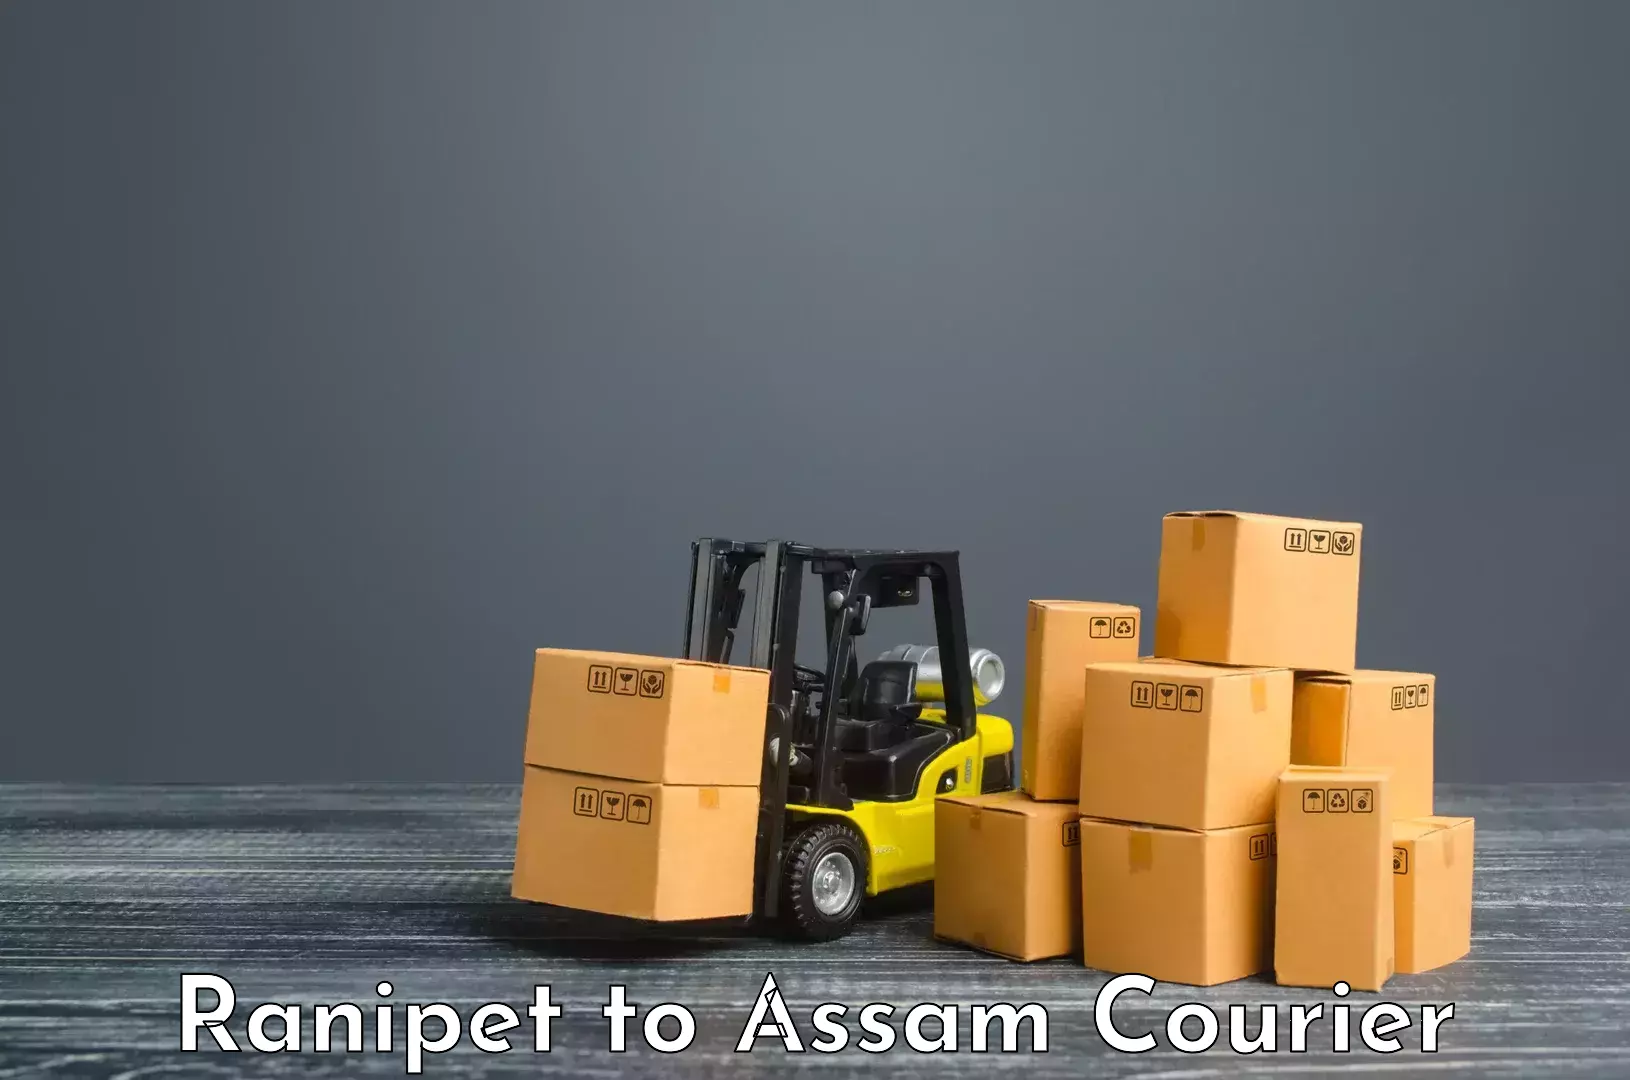 Express delivery network Ranipet to Karbi Anglong